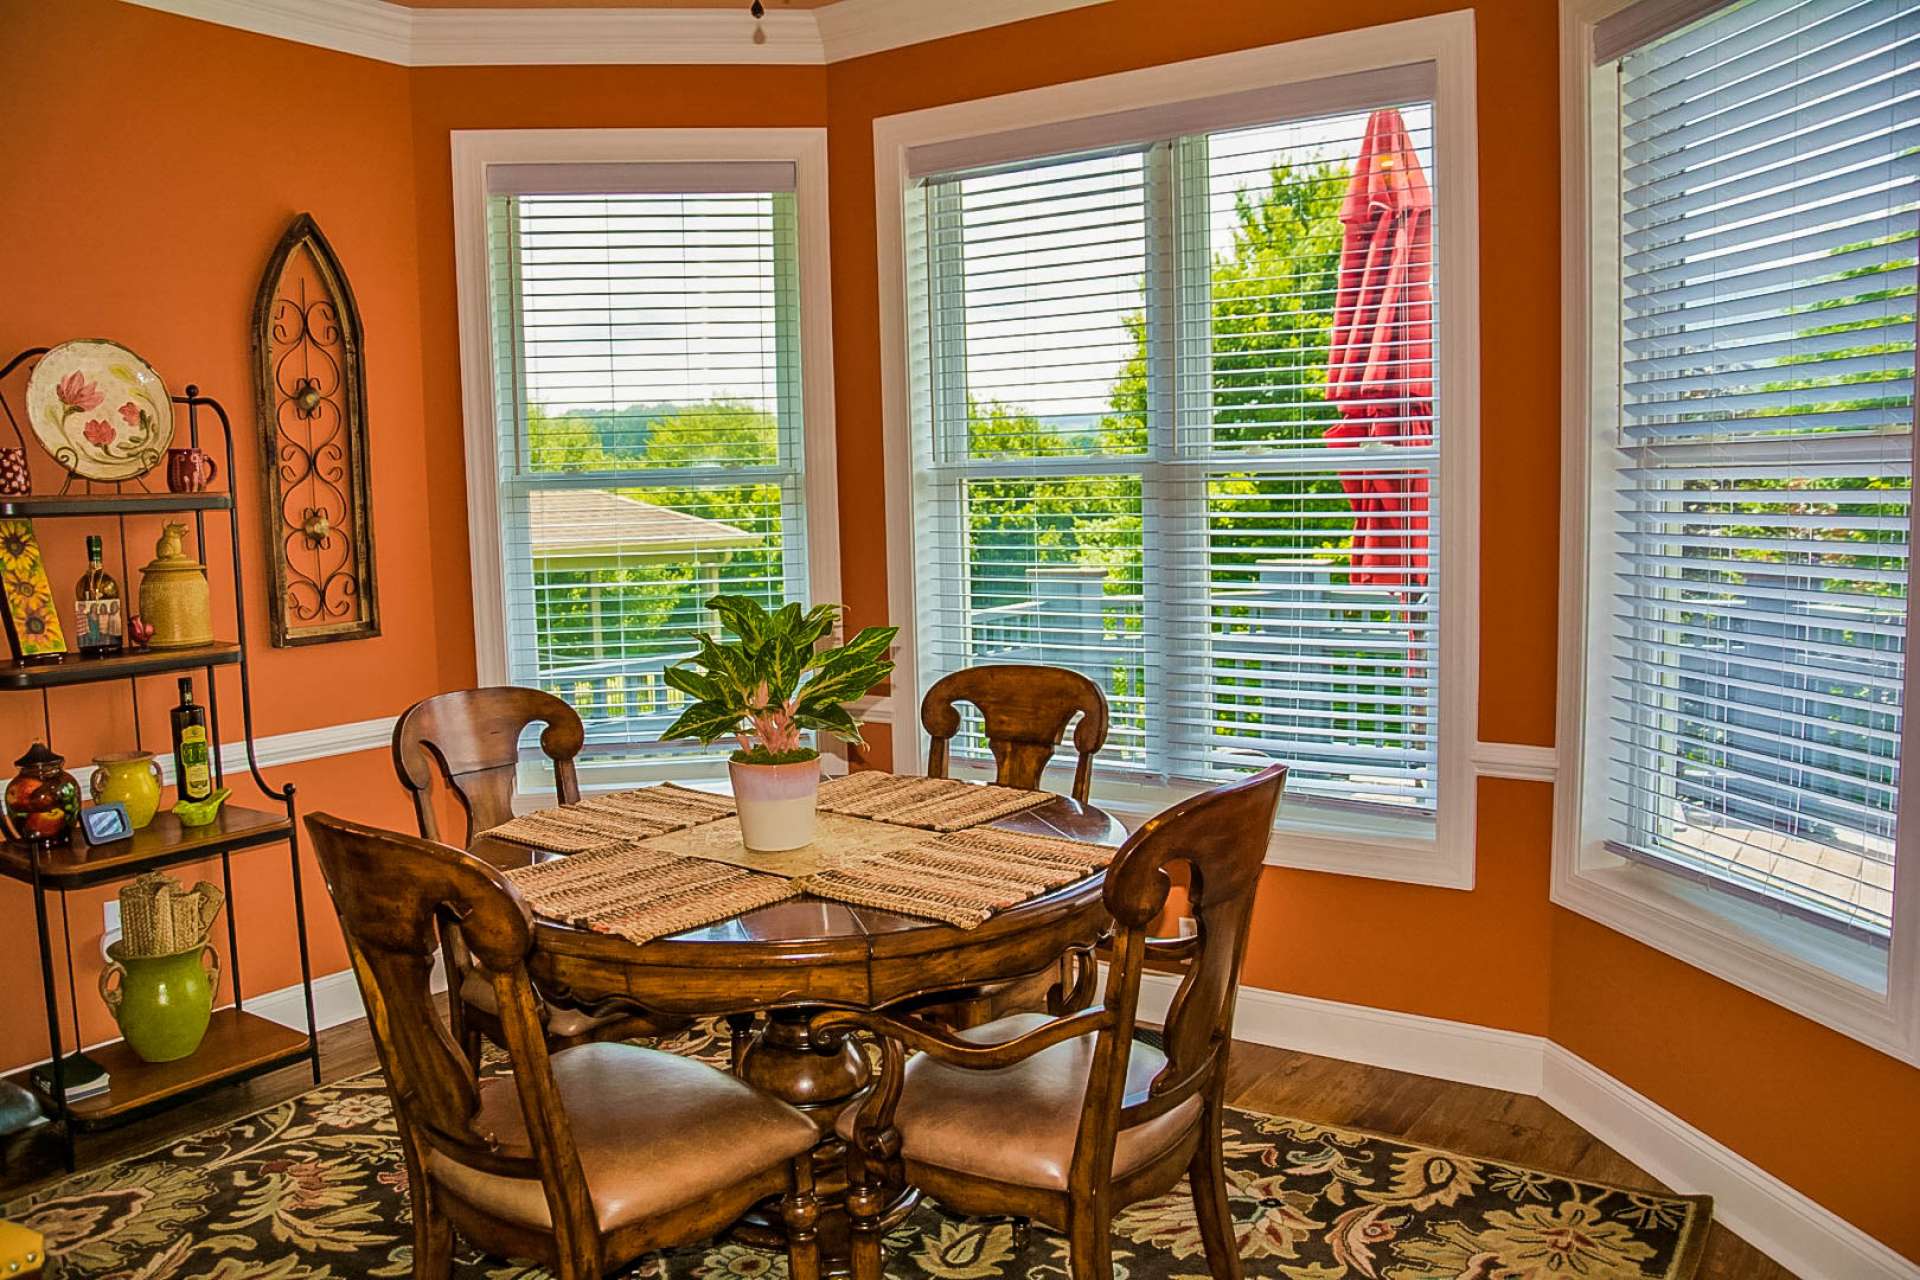 This cozy breakfast nook is located just off the kitchen and features lots of windows to enjoy the outdoor scenery from inside.